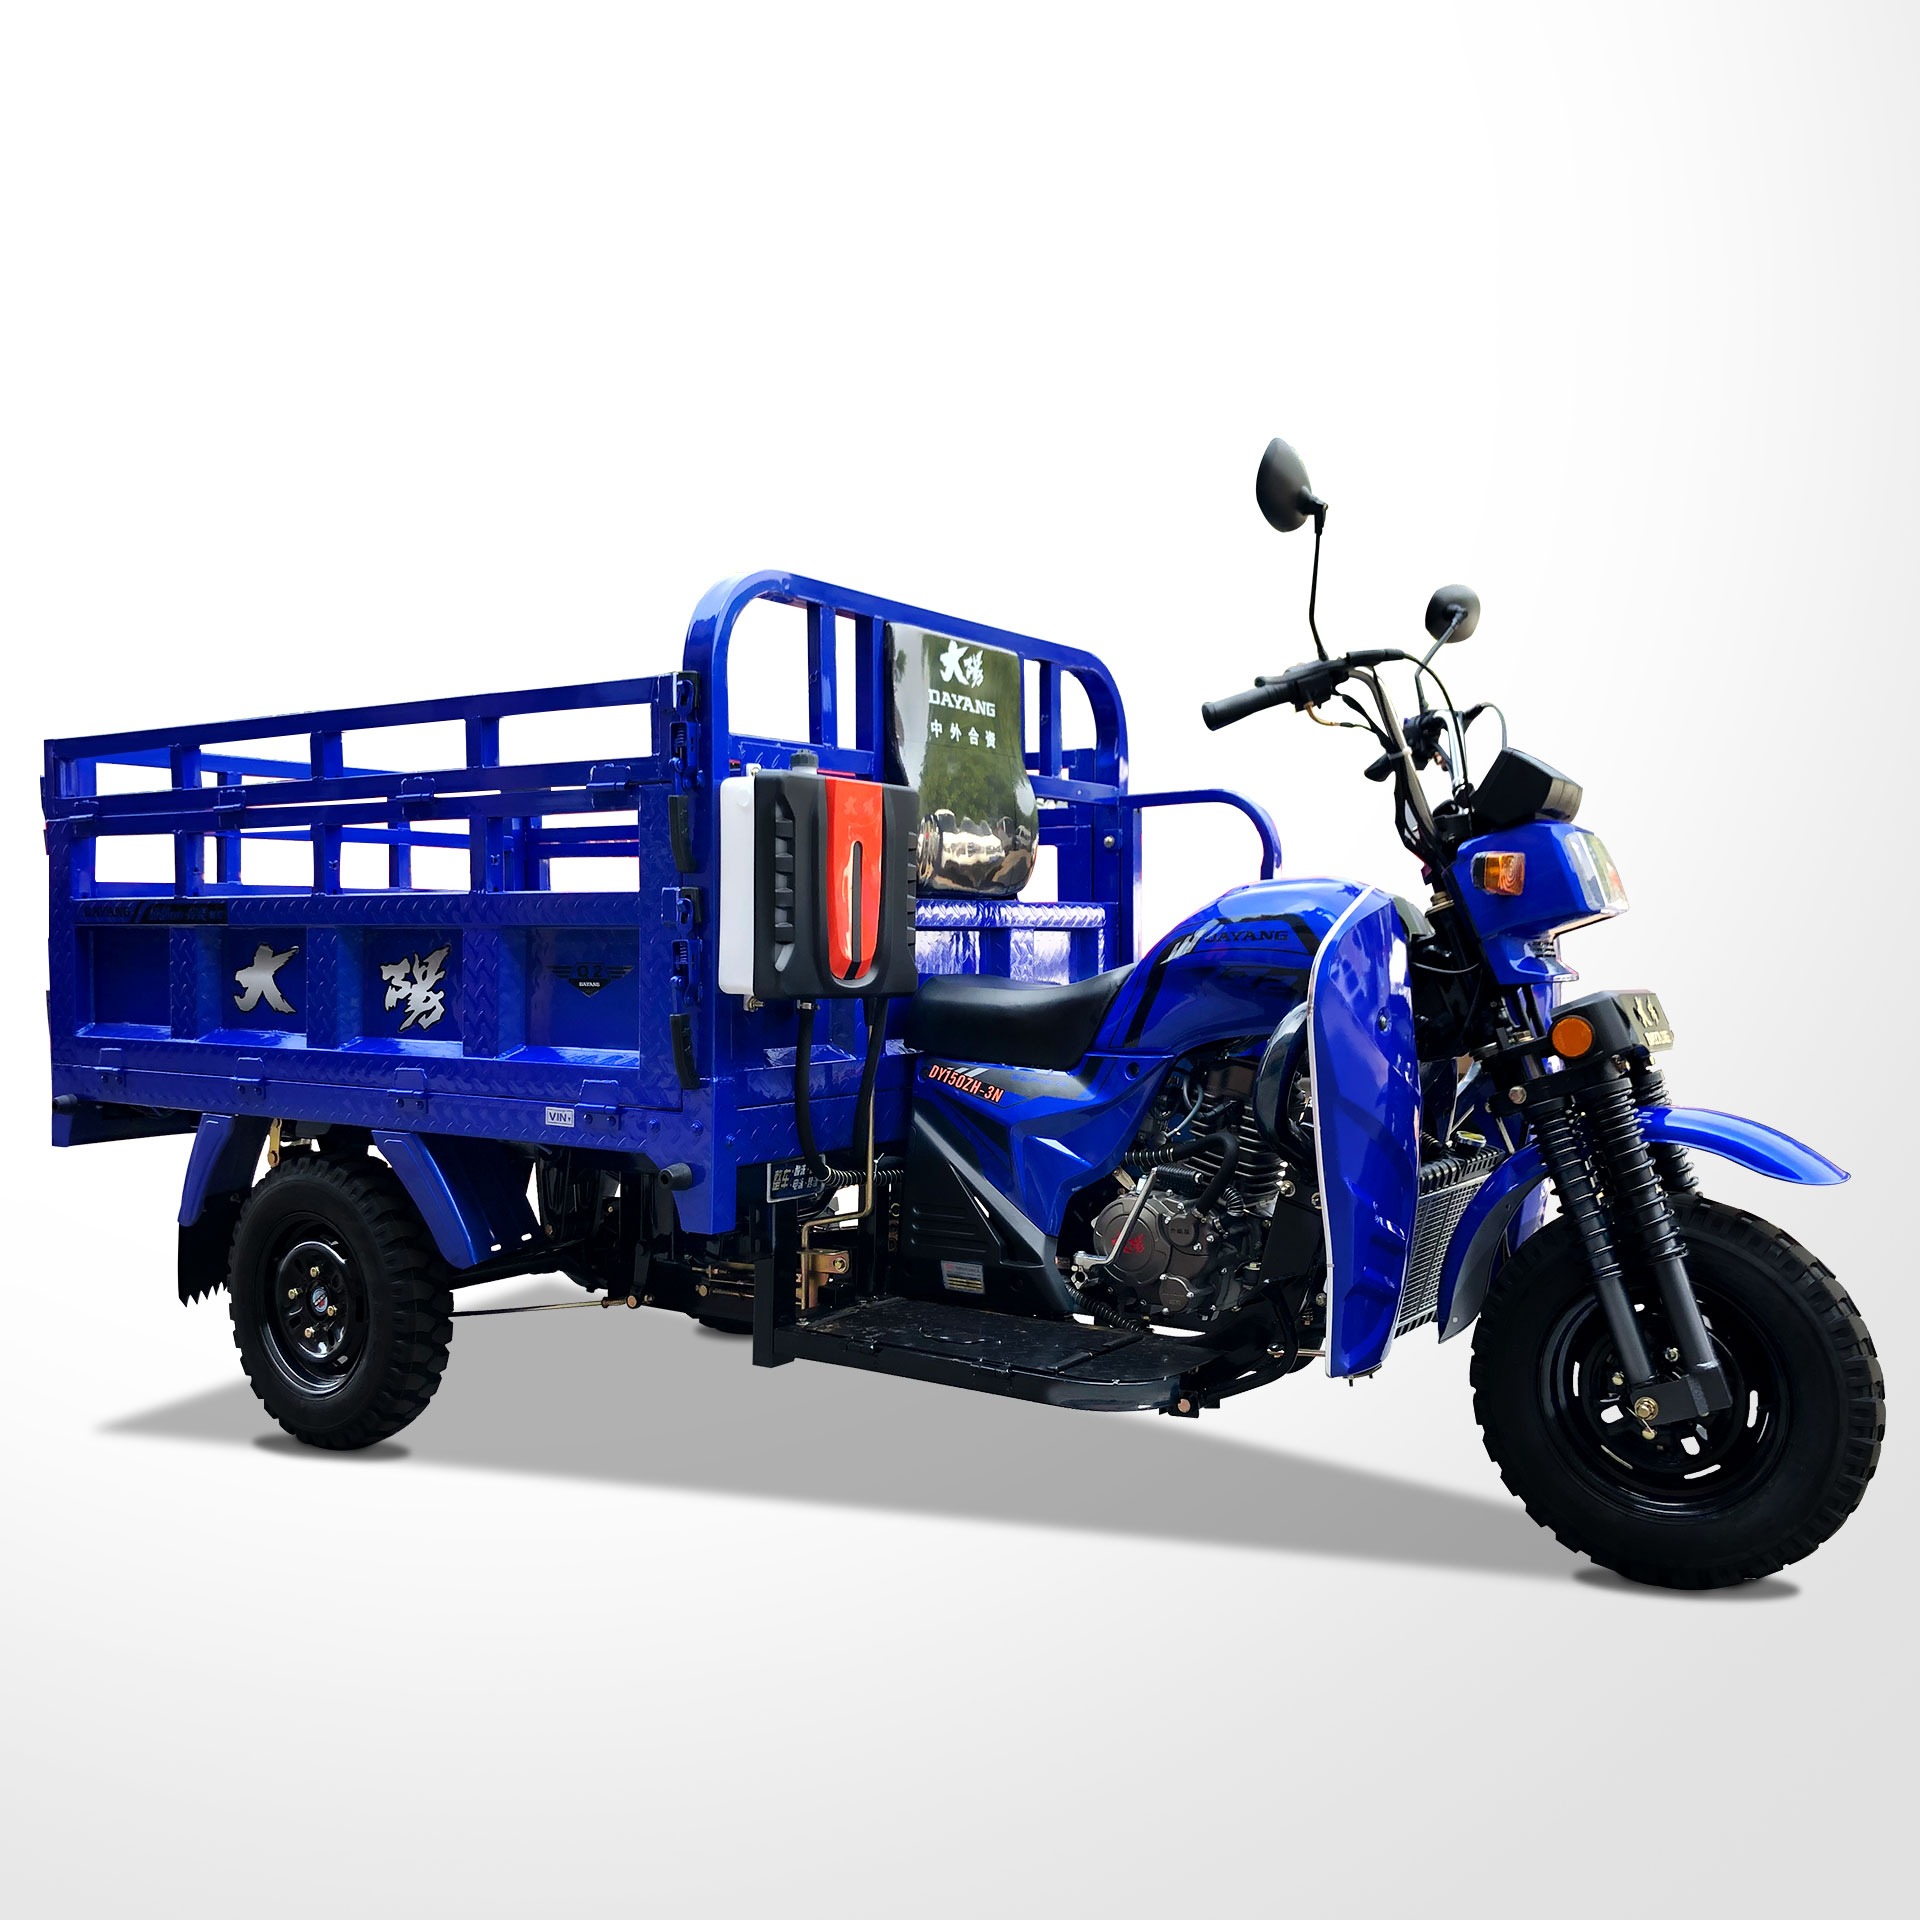 China Factory 150cc Air Cooled Tricycle Gasoline Motor Three Wheel Cargo Tricycle Manufacturer  motorized Cargo Bike